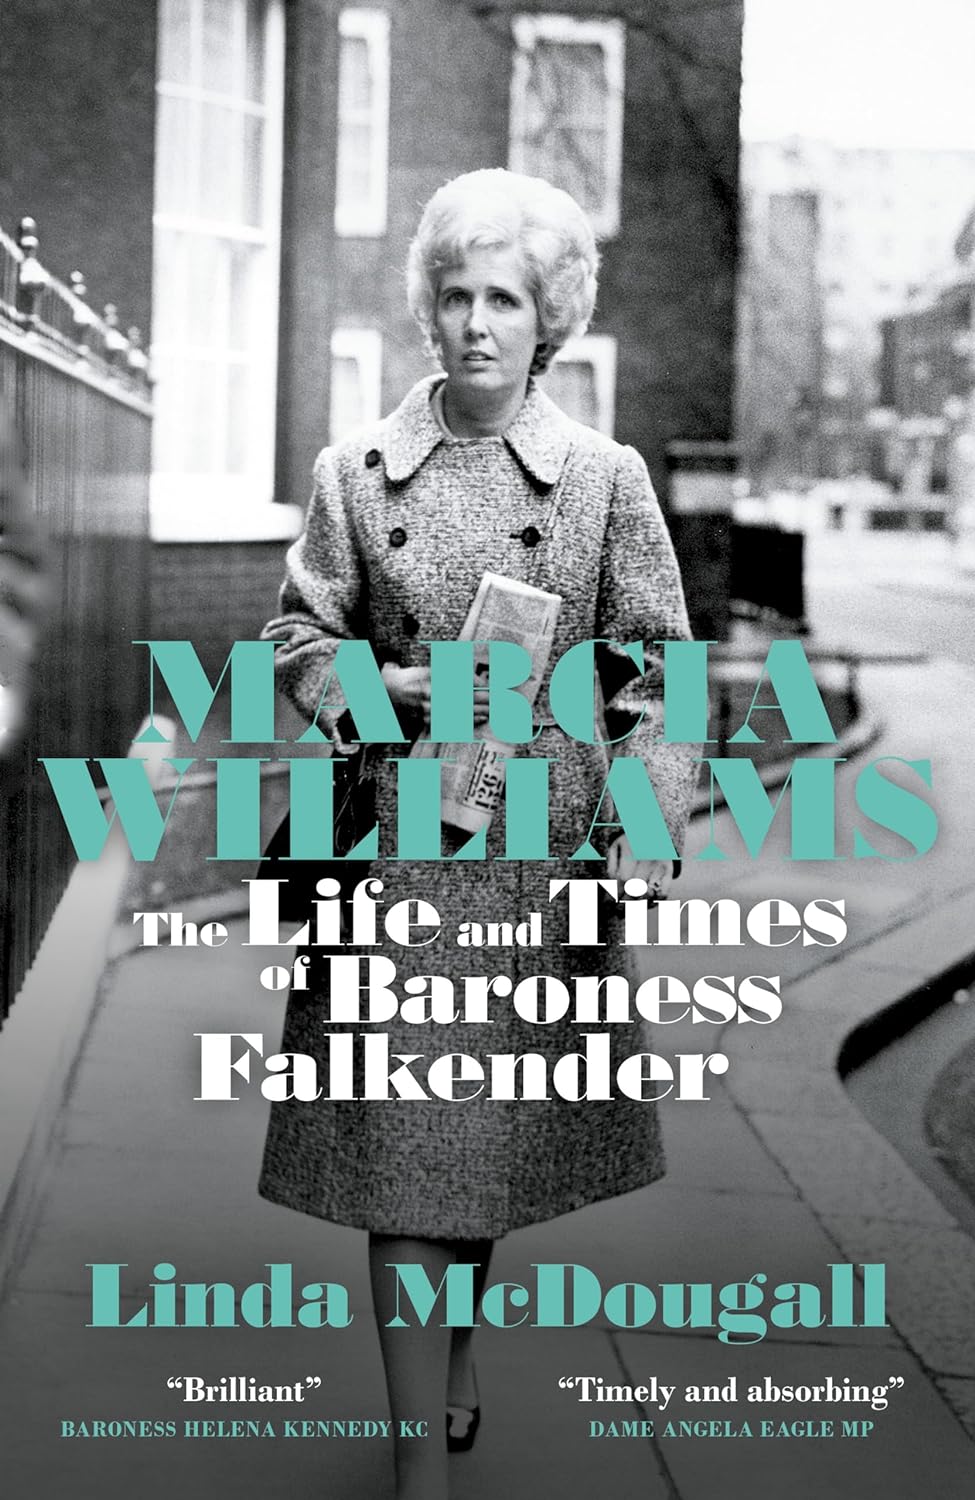 Marcia_Williams_the_life_and_times_of_Baroness_Falkender_book_cover